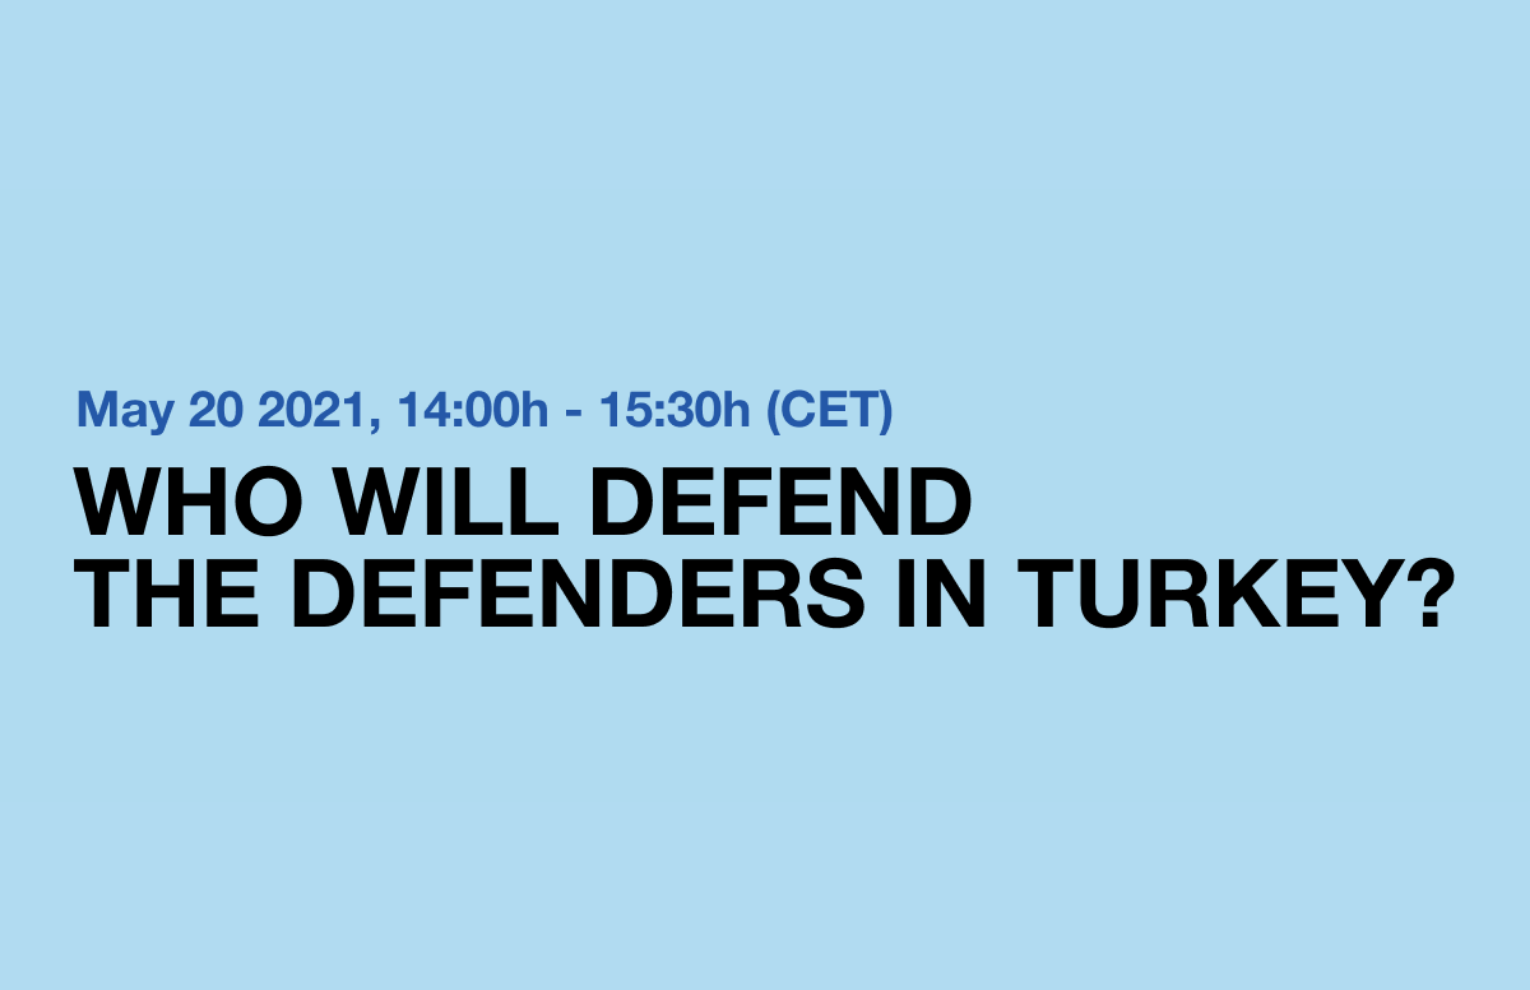 Who will Defend the Defenders in Turkey?